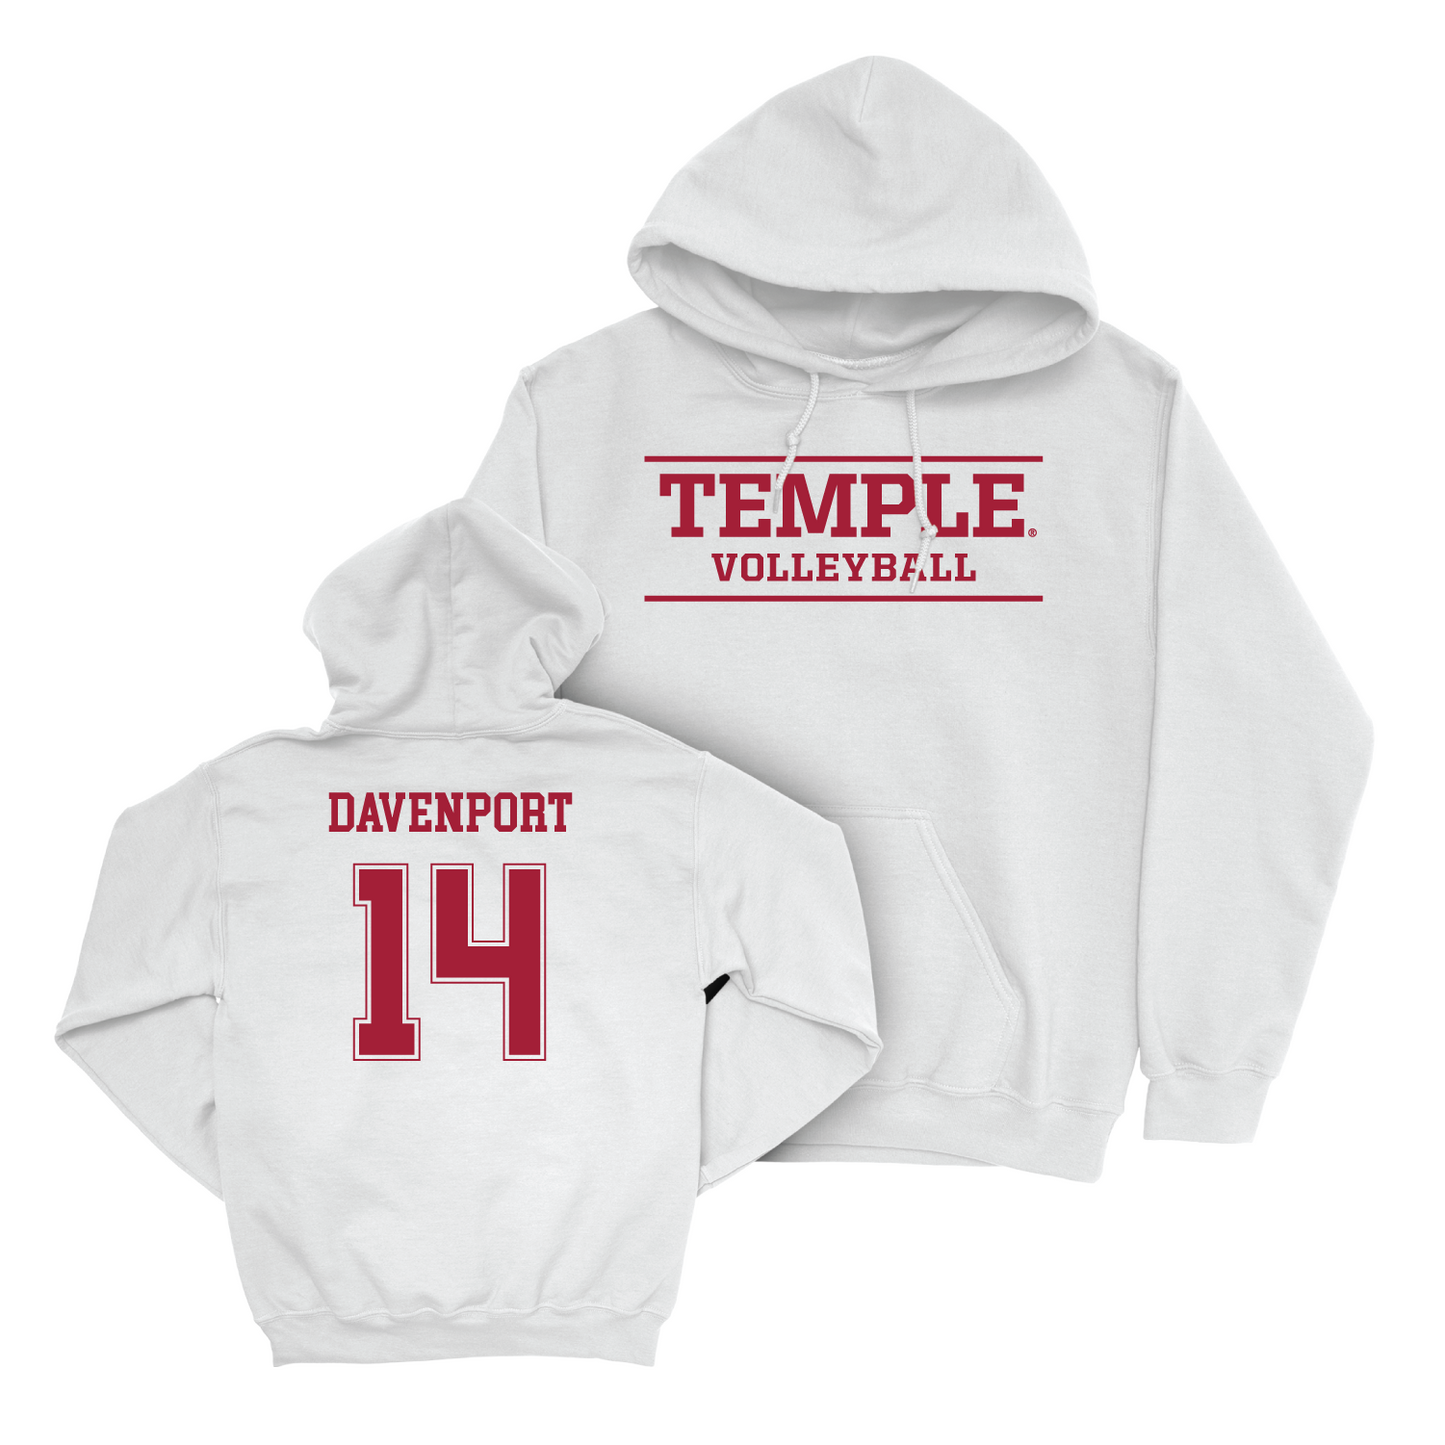 Women's Volleyball White Classic Hoodie - Taylor Davenport Youth Small